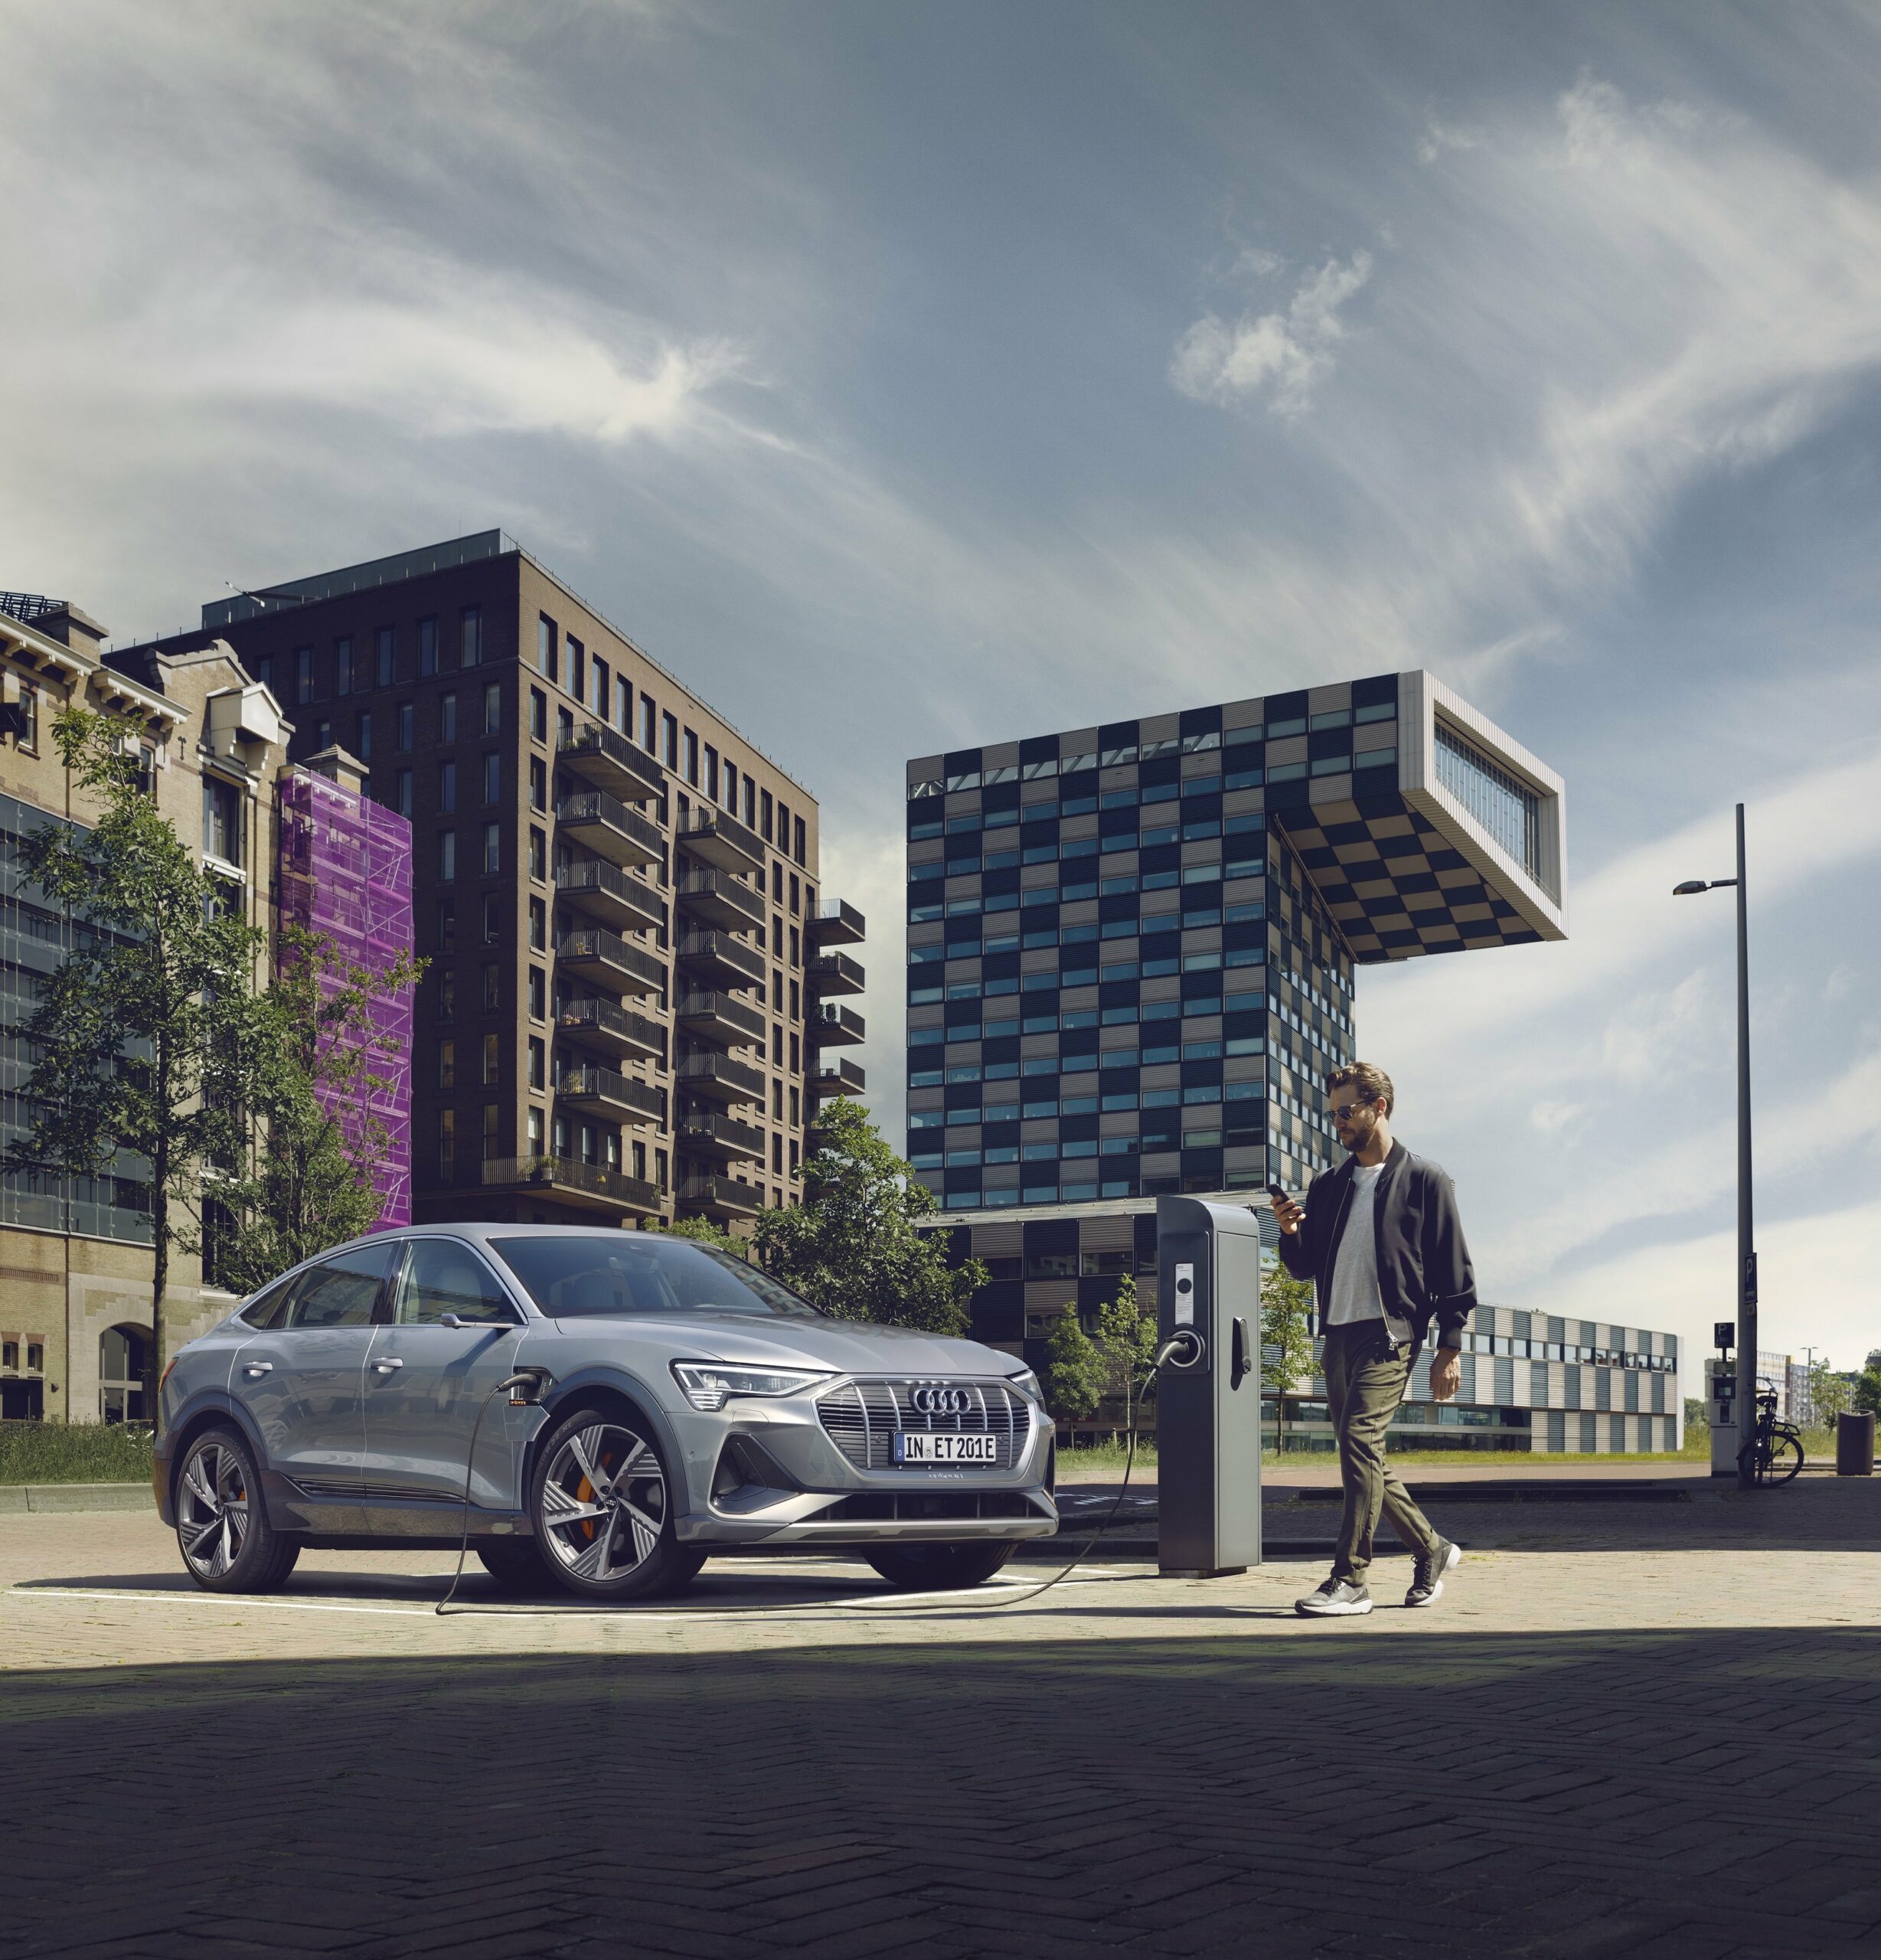 Audi announces new charging options and benefits for EV customers. All Audi e-tron and Audi e-tron Sportback customers who buy the SUV in 2021